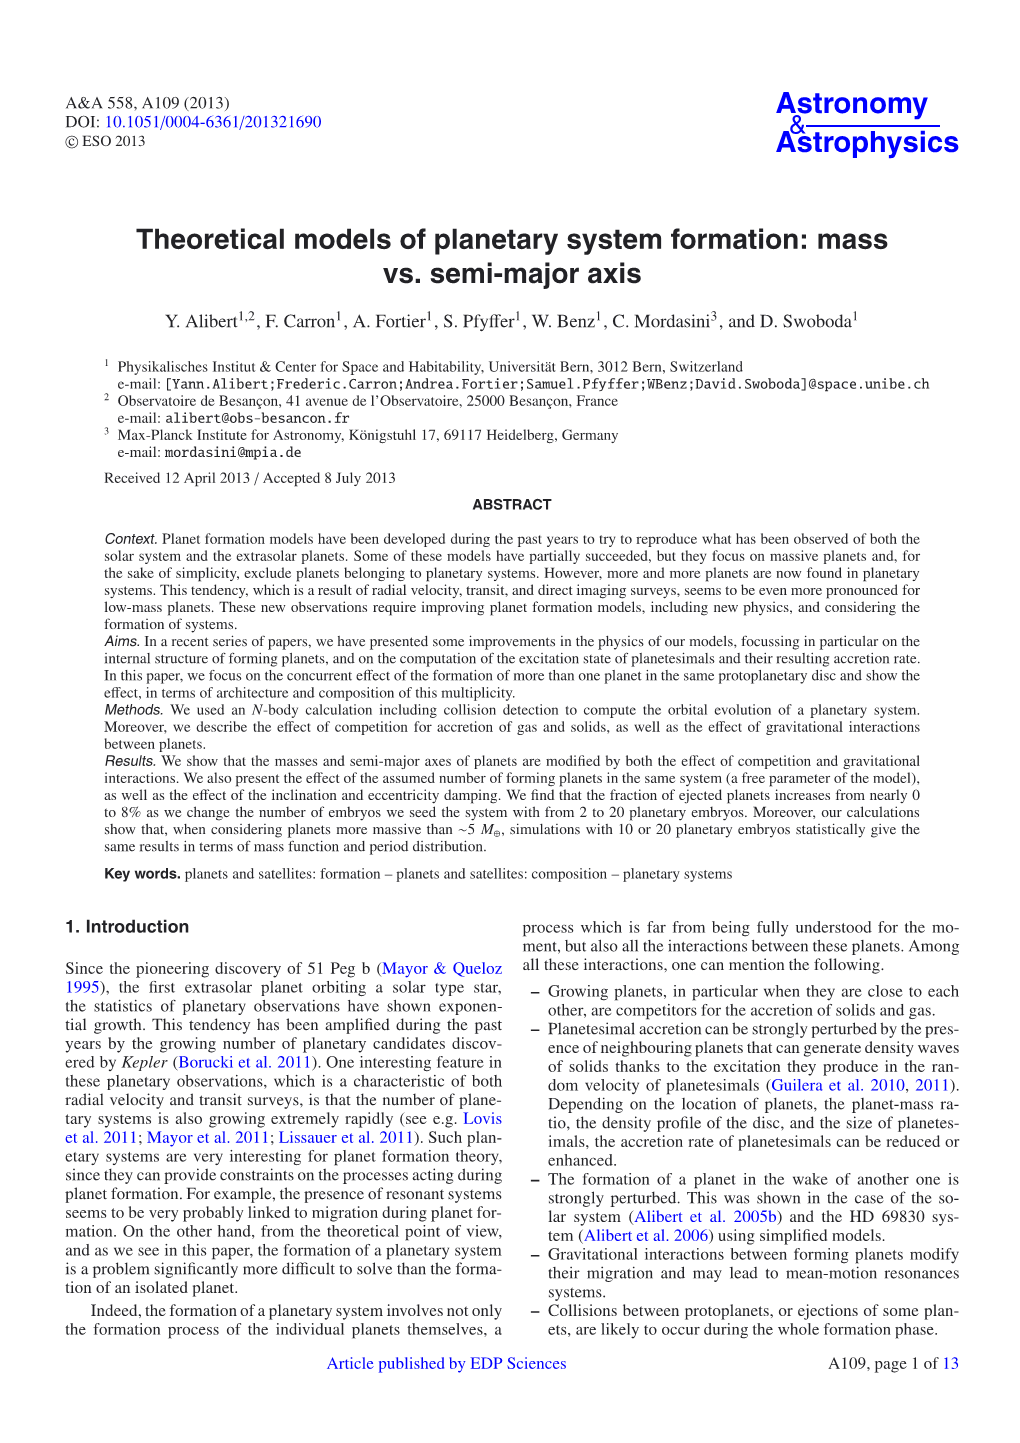 Theoretical Models of Planetary System Formation: Mass Vs. Semi-Major Axis